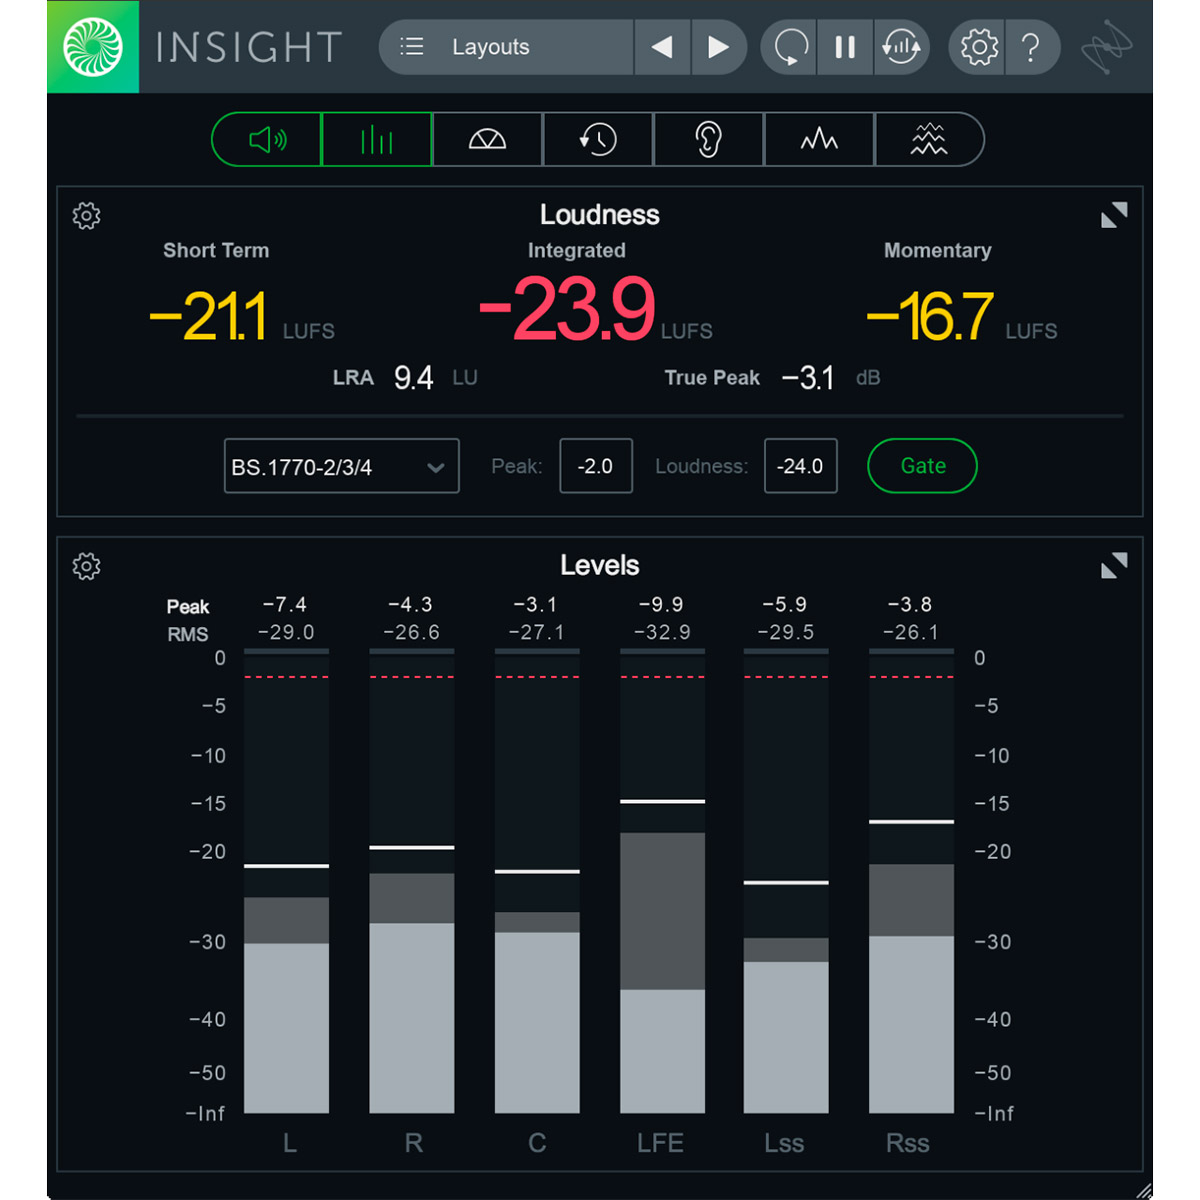 download the new iZotope Insight Pro 2.4.0